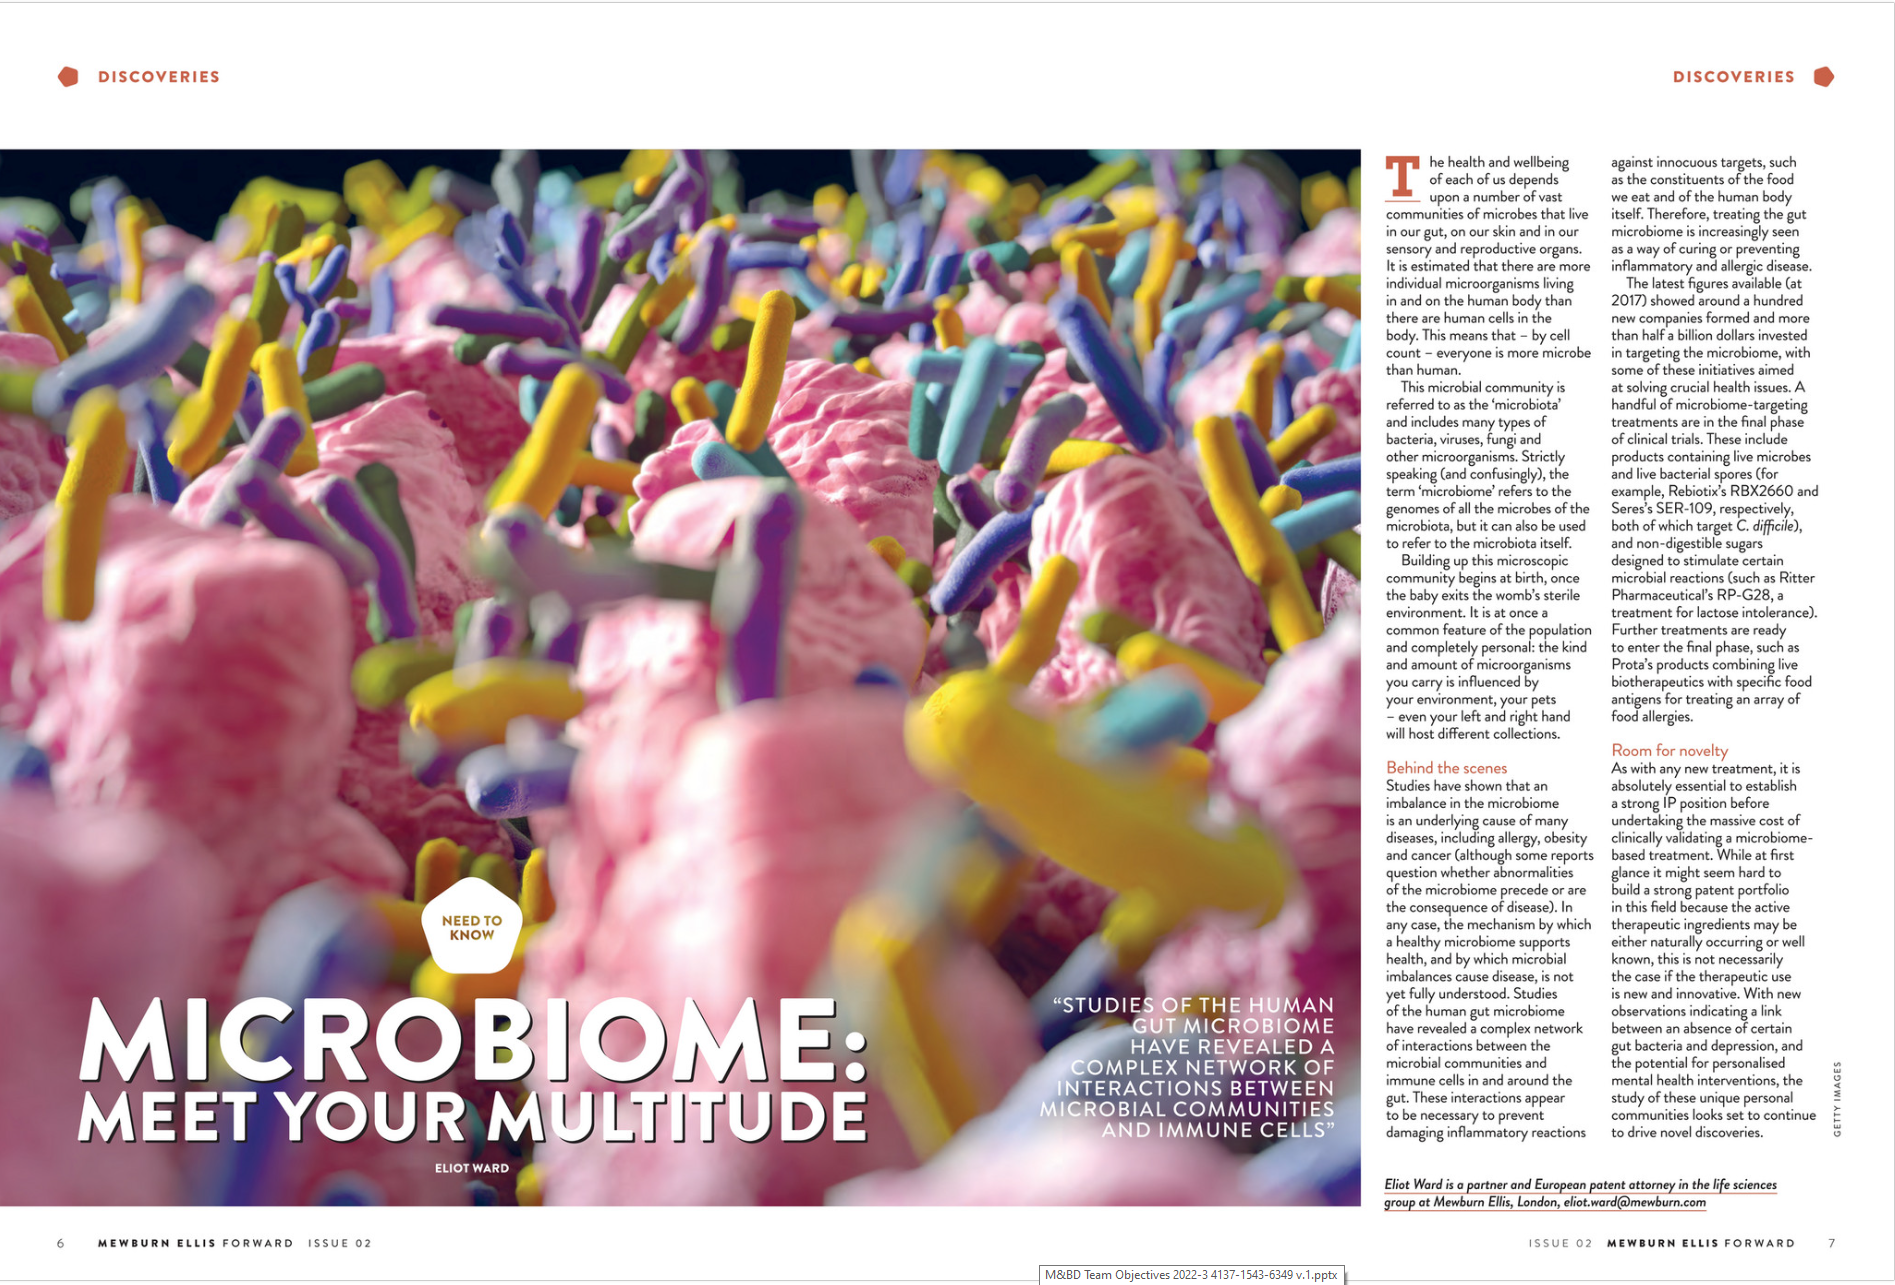 Microbiome article